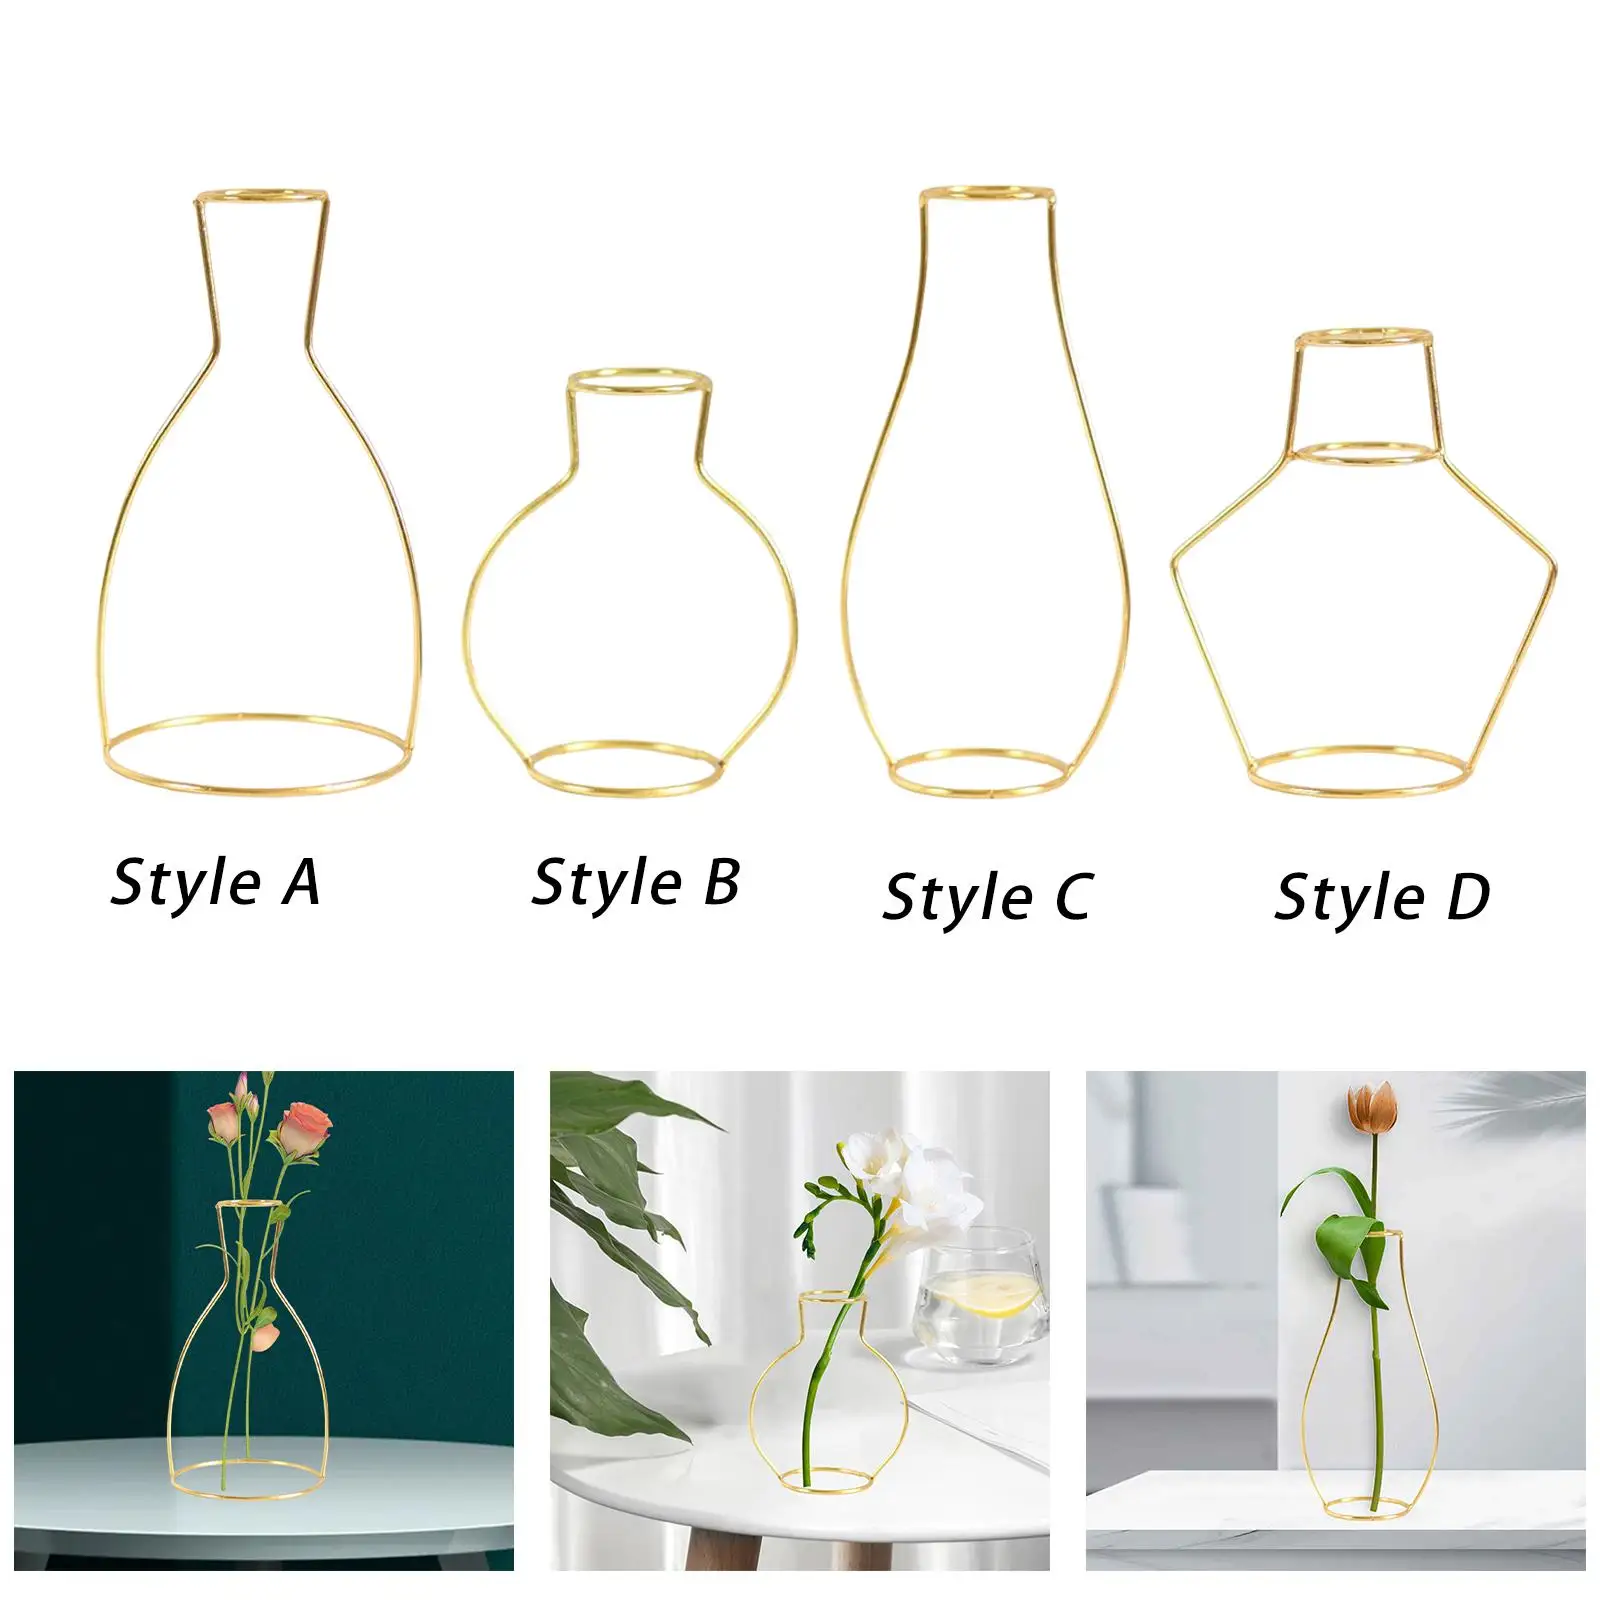 Metal Wire Vase Decor Simple Creative European Style Ornaments Metal Frame Vase for Cafe Gift Cabinet Holidays Living Room